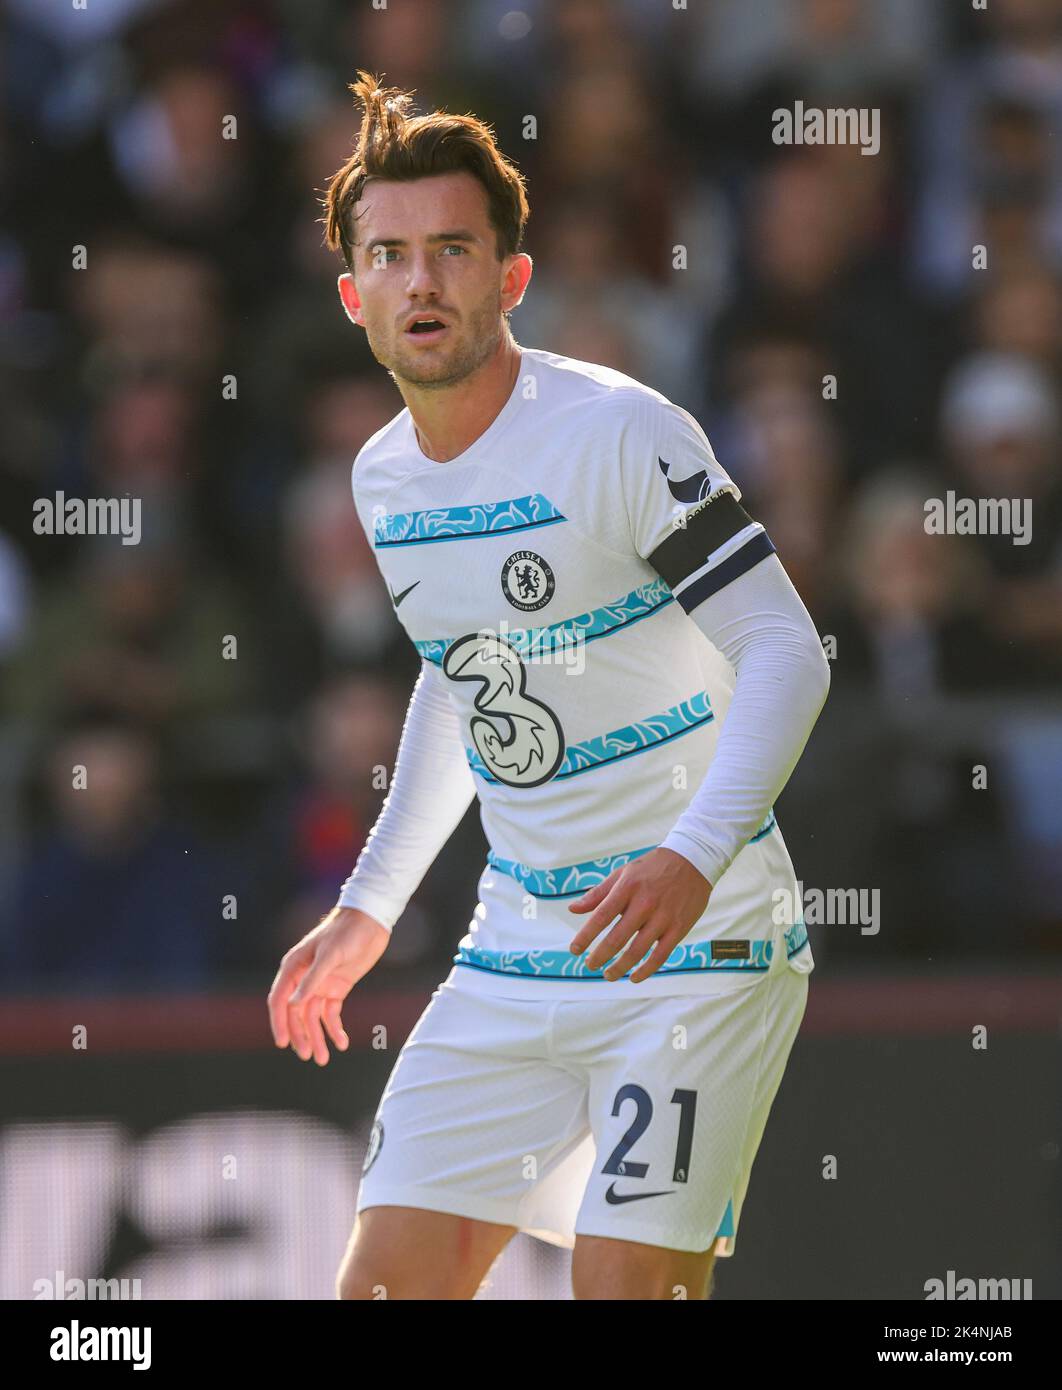 01 Oct 2022 - Crystal Palace v Chelsea - Premier League - Selhurst Park  Chelsea's Ben Chilwell during the Premier League match against Crystal Palace. Picture : Mark Pain / Alamy Live News Stock Photo